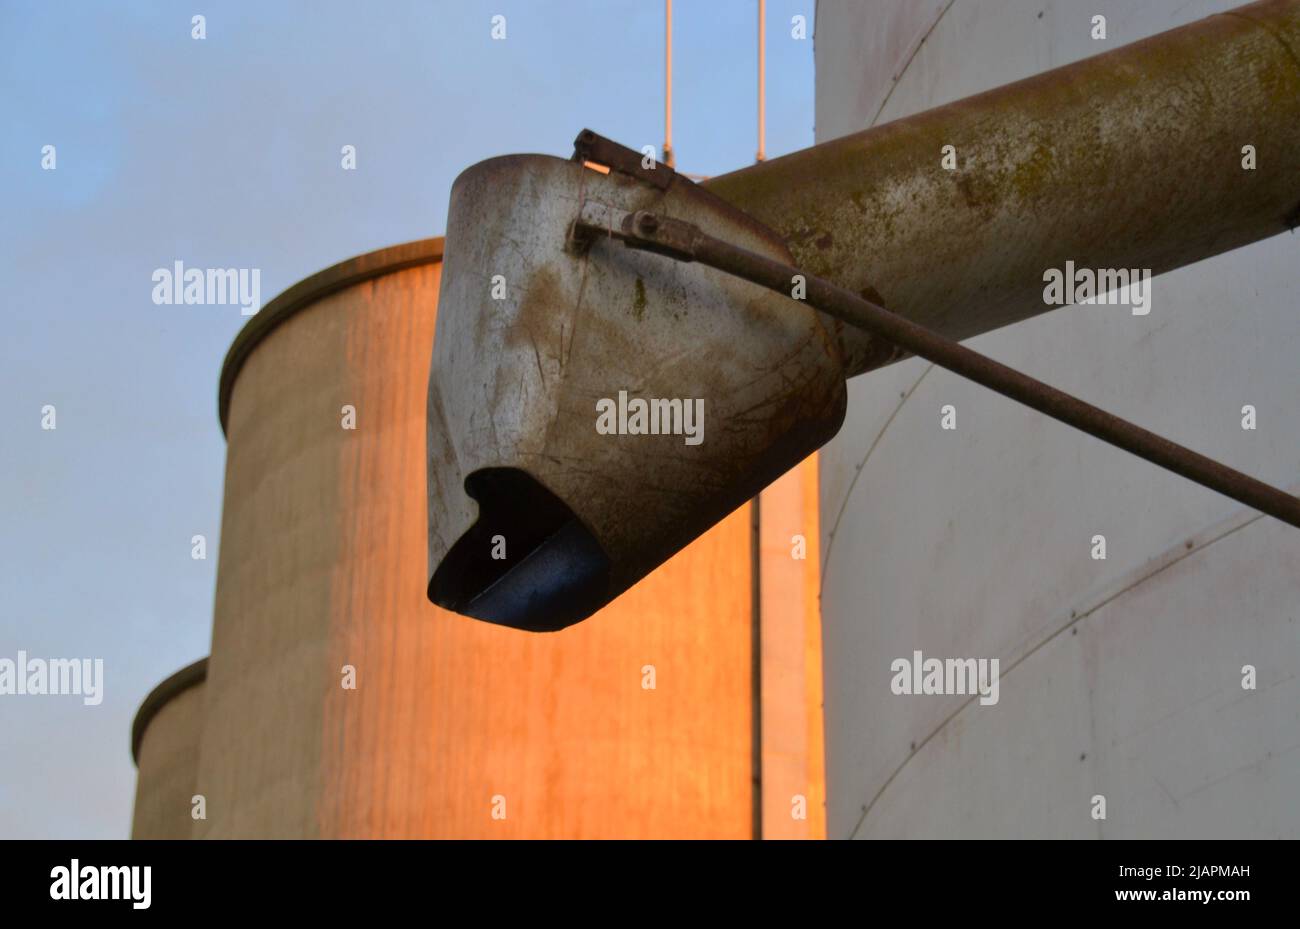 Close up of a metal or steel grain hopper in the early morning light with silos in the background in regional Australia Stock Photo